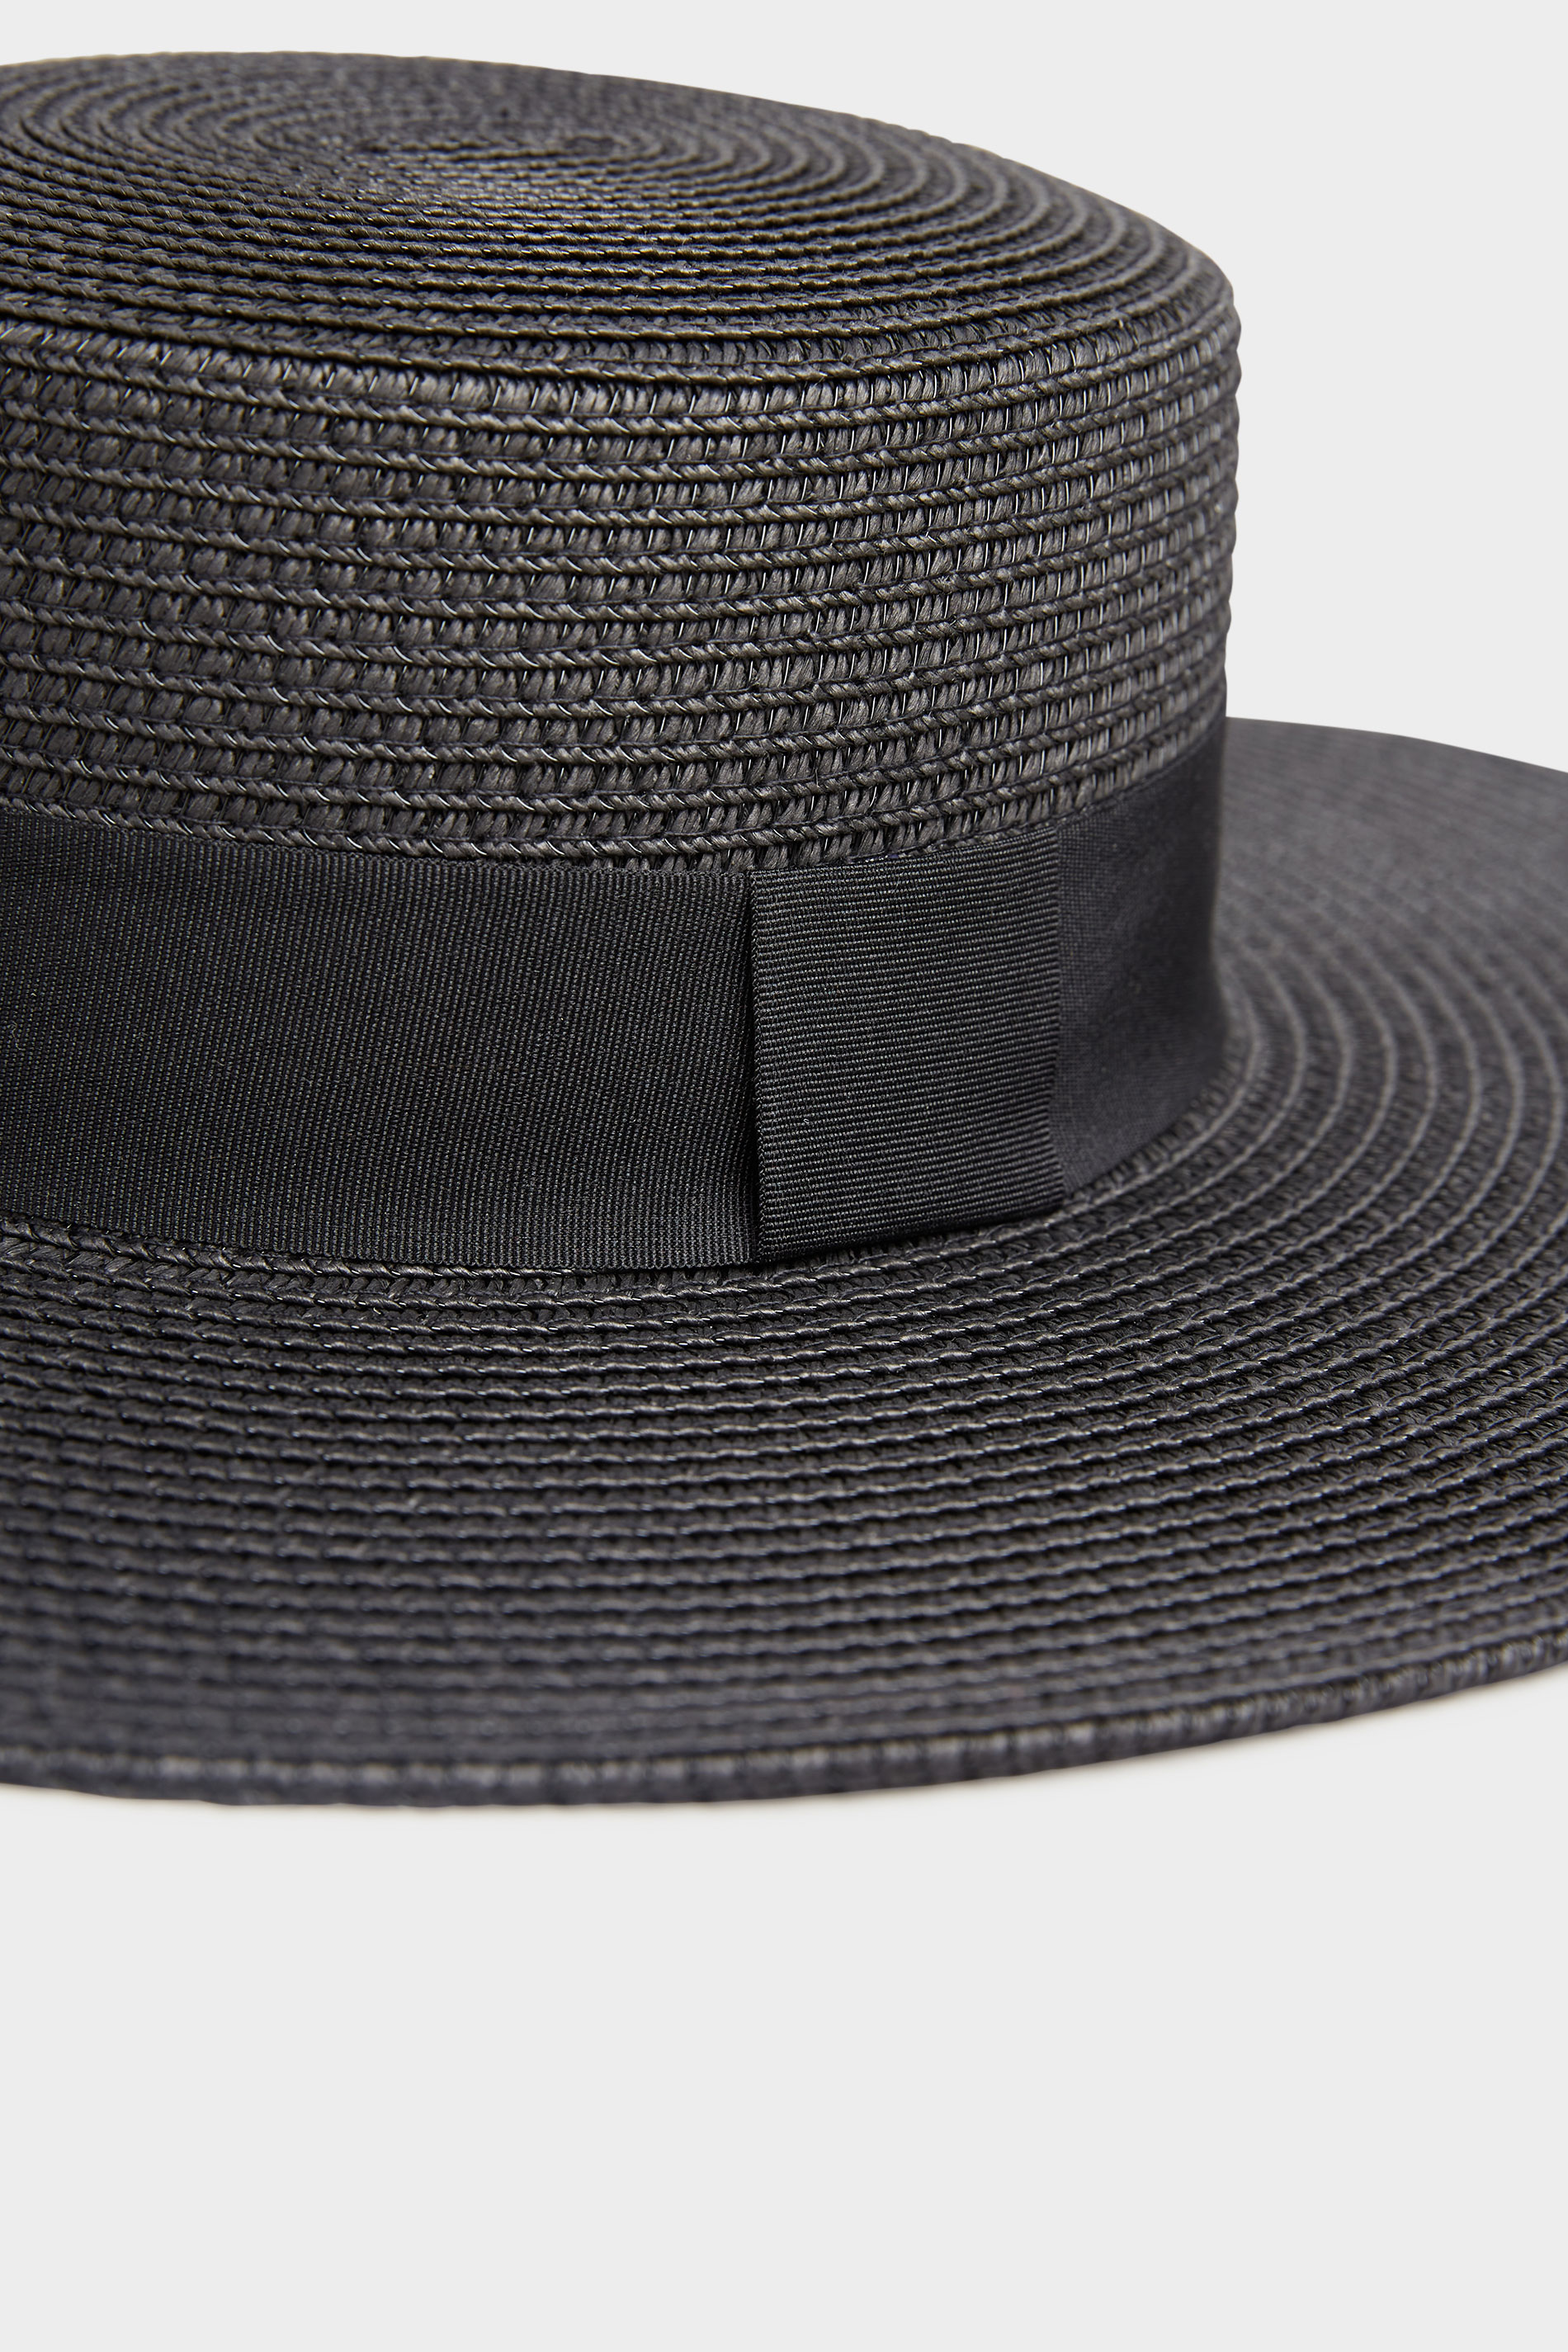 Black Straw Wide Brim Boater Hat | Yours Clothing 3